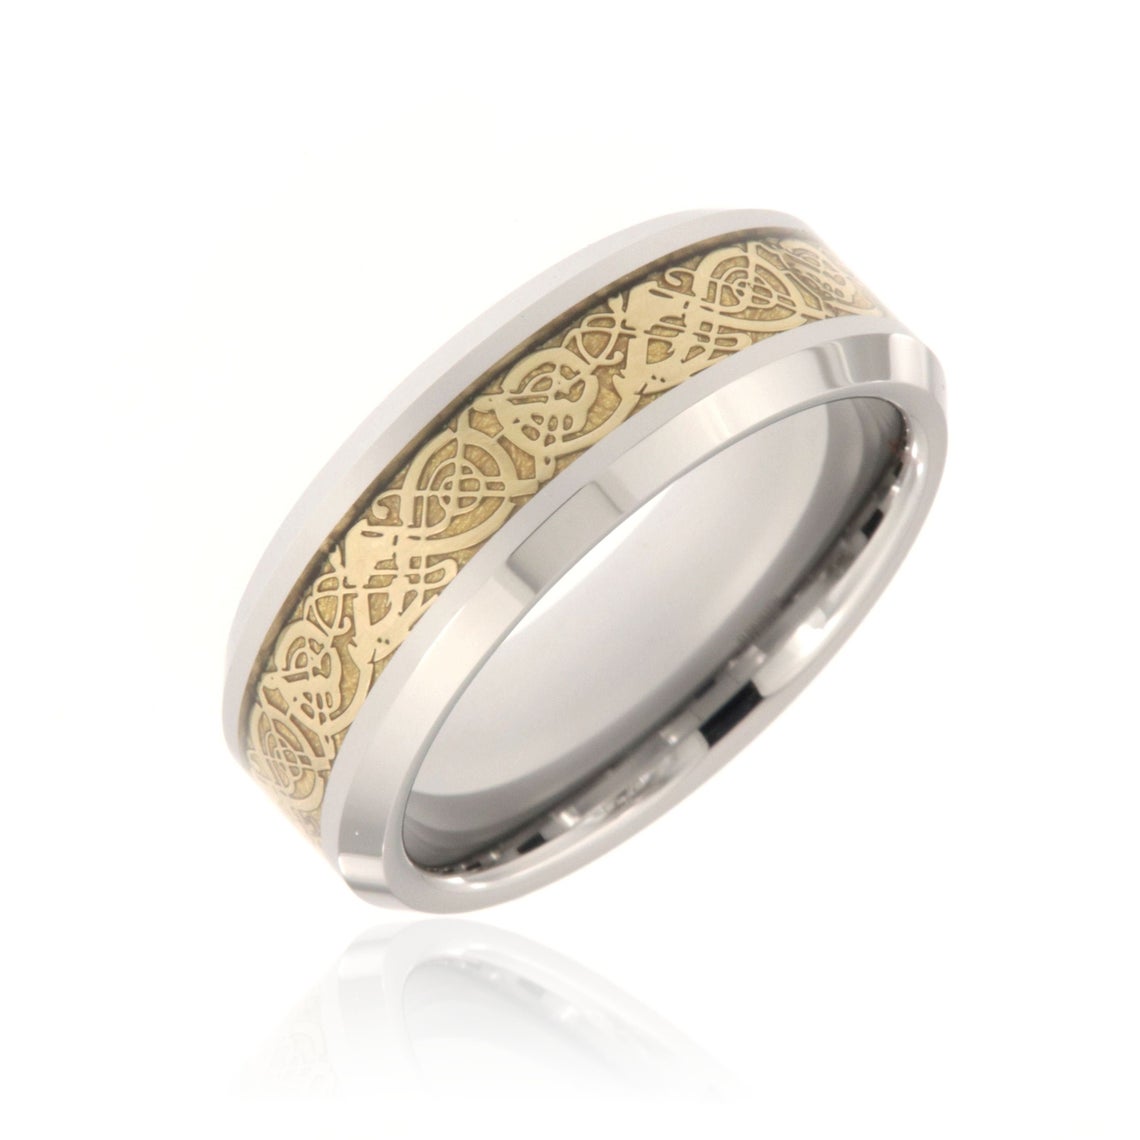 8mm wide tungsten ring with a gold Celtic center inlay